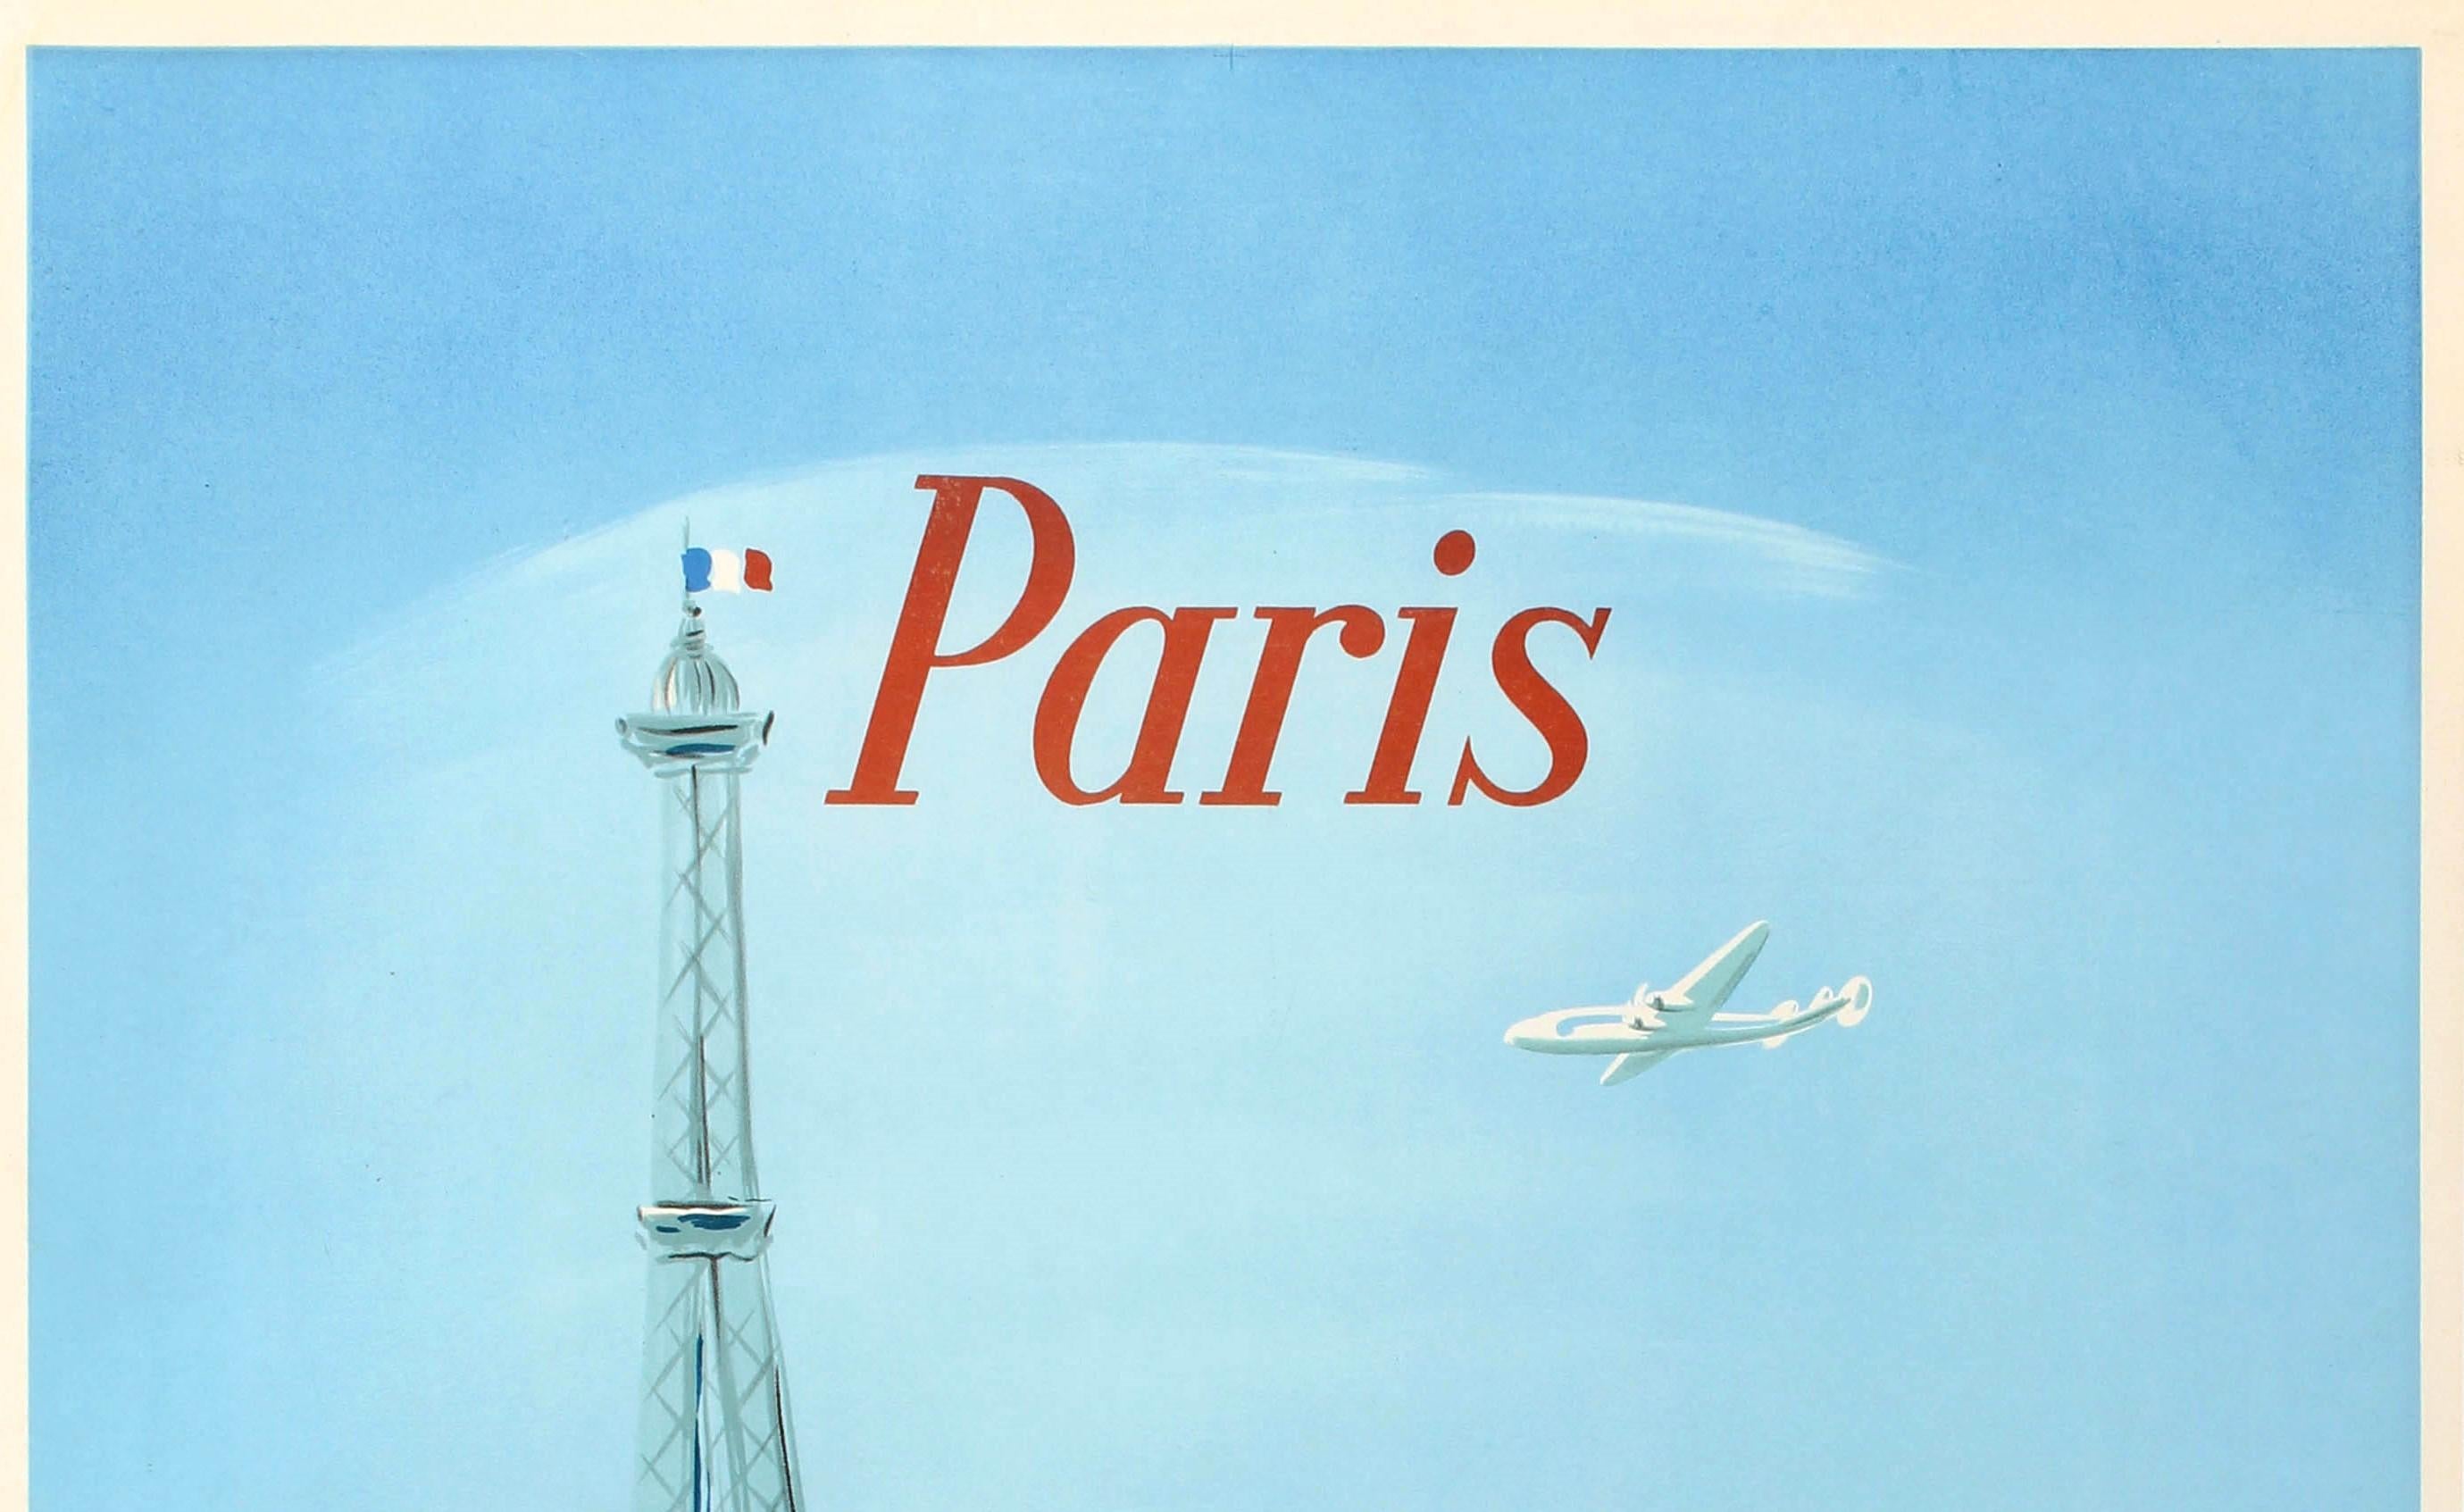 Original vintage travel poster for Paris by Air France featuring a great design depicting the Eiffel Tower and other historic buildings and architecture in the French capital on the back of a white bird with an Air France Lockheed Constellation